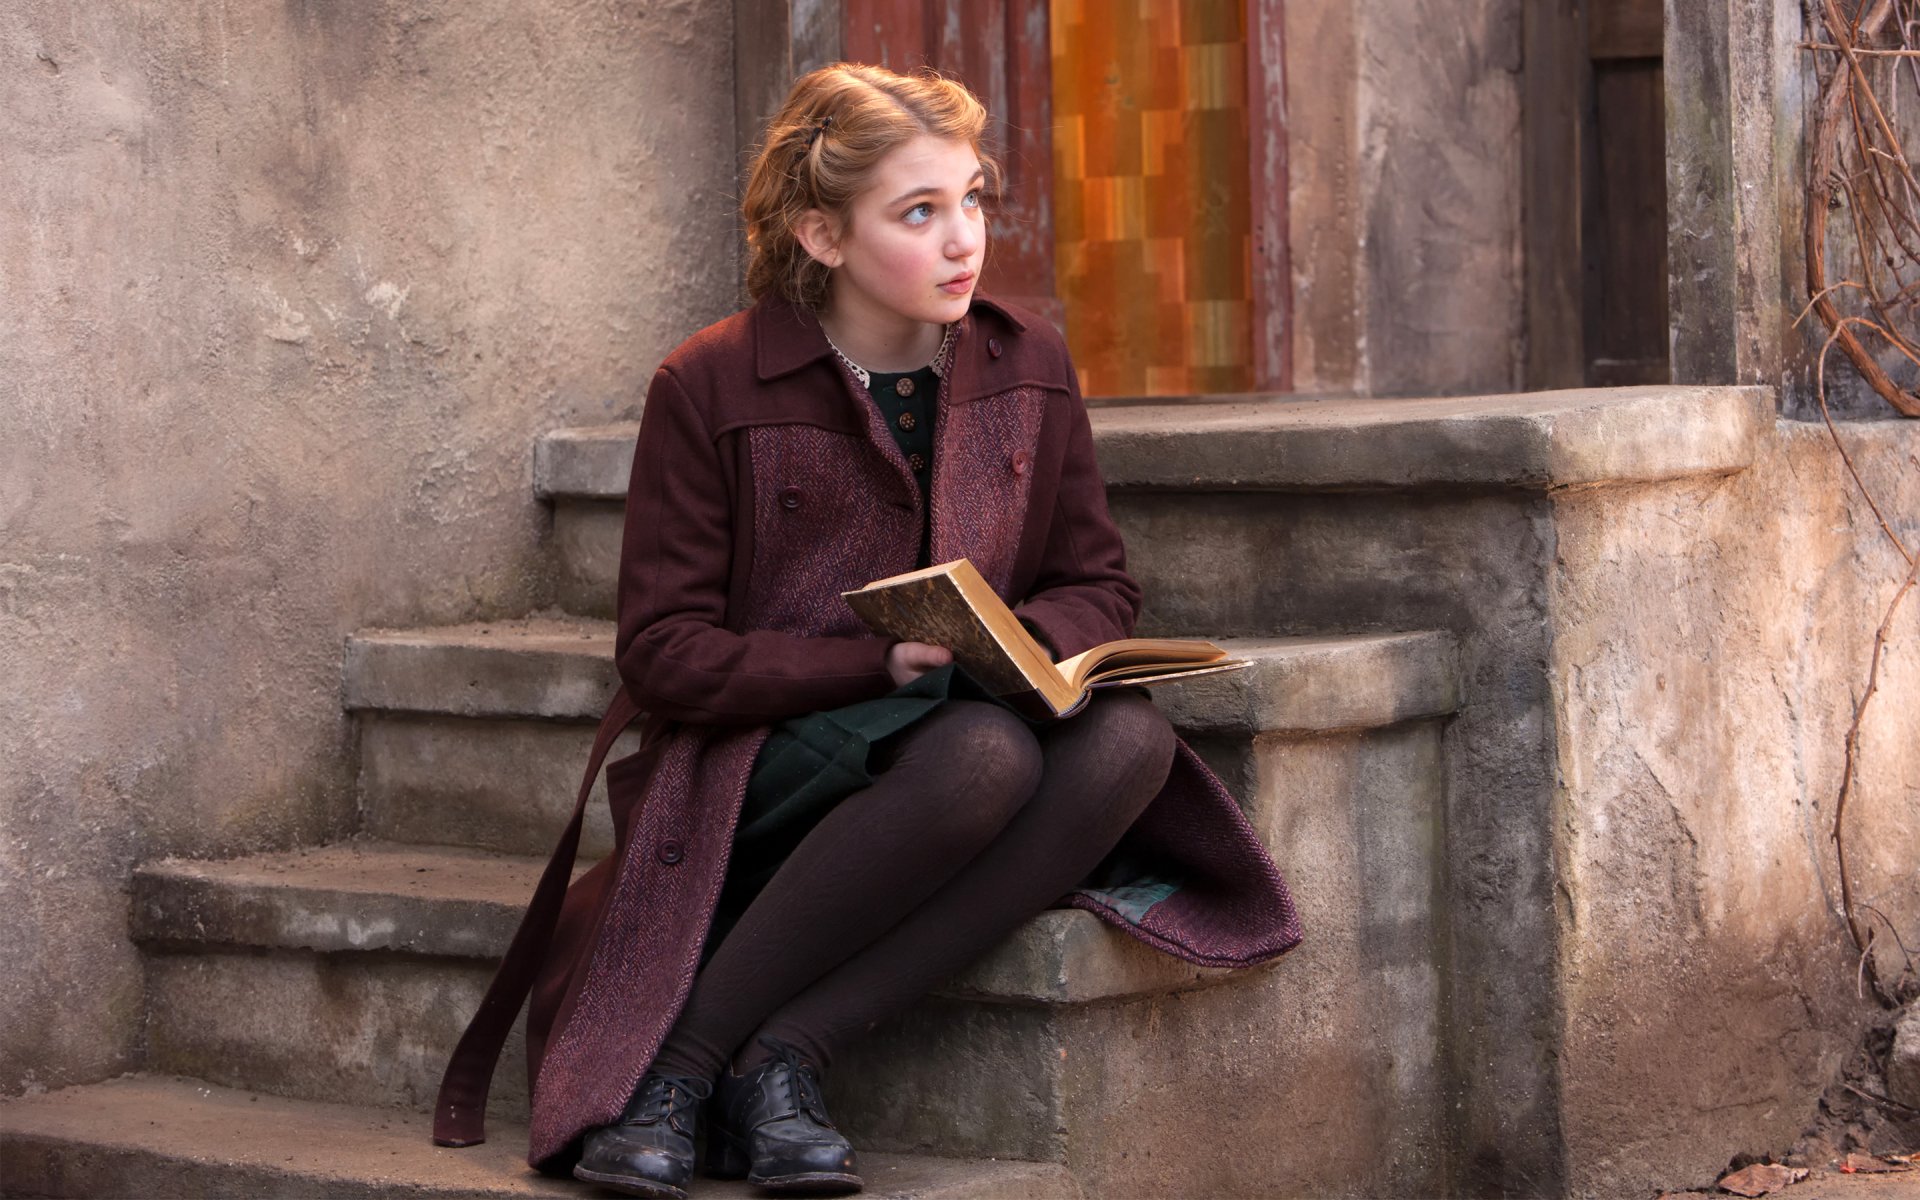 The Book Thief HD Wallpapers and Backgrounds